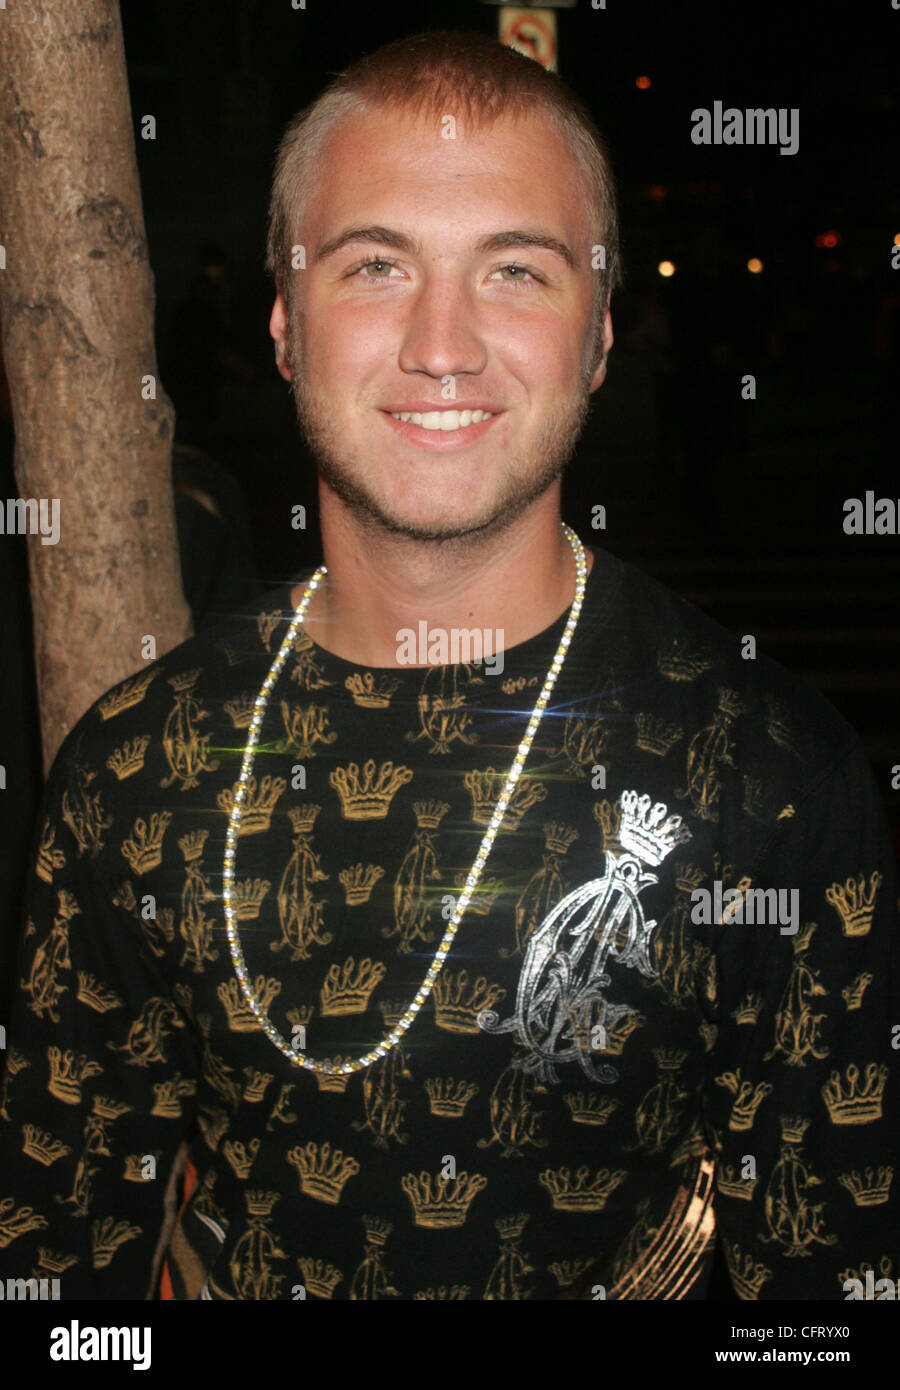 Aug 26, 2007 - Clearwater, FL, USA - Nick Bollea, aka NICK HOGAN 17, of 'Hogan Knows Best 'Reality show, was the driver of a Toyota Supra that went out of control while driving at a 'high rate of speed' about 7:30 p.m. Sunday. The car 'inexplicably left the roadway,' jumped across a raised median an Stock Photo